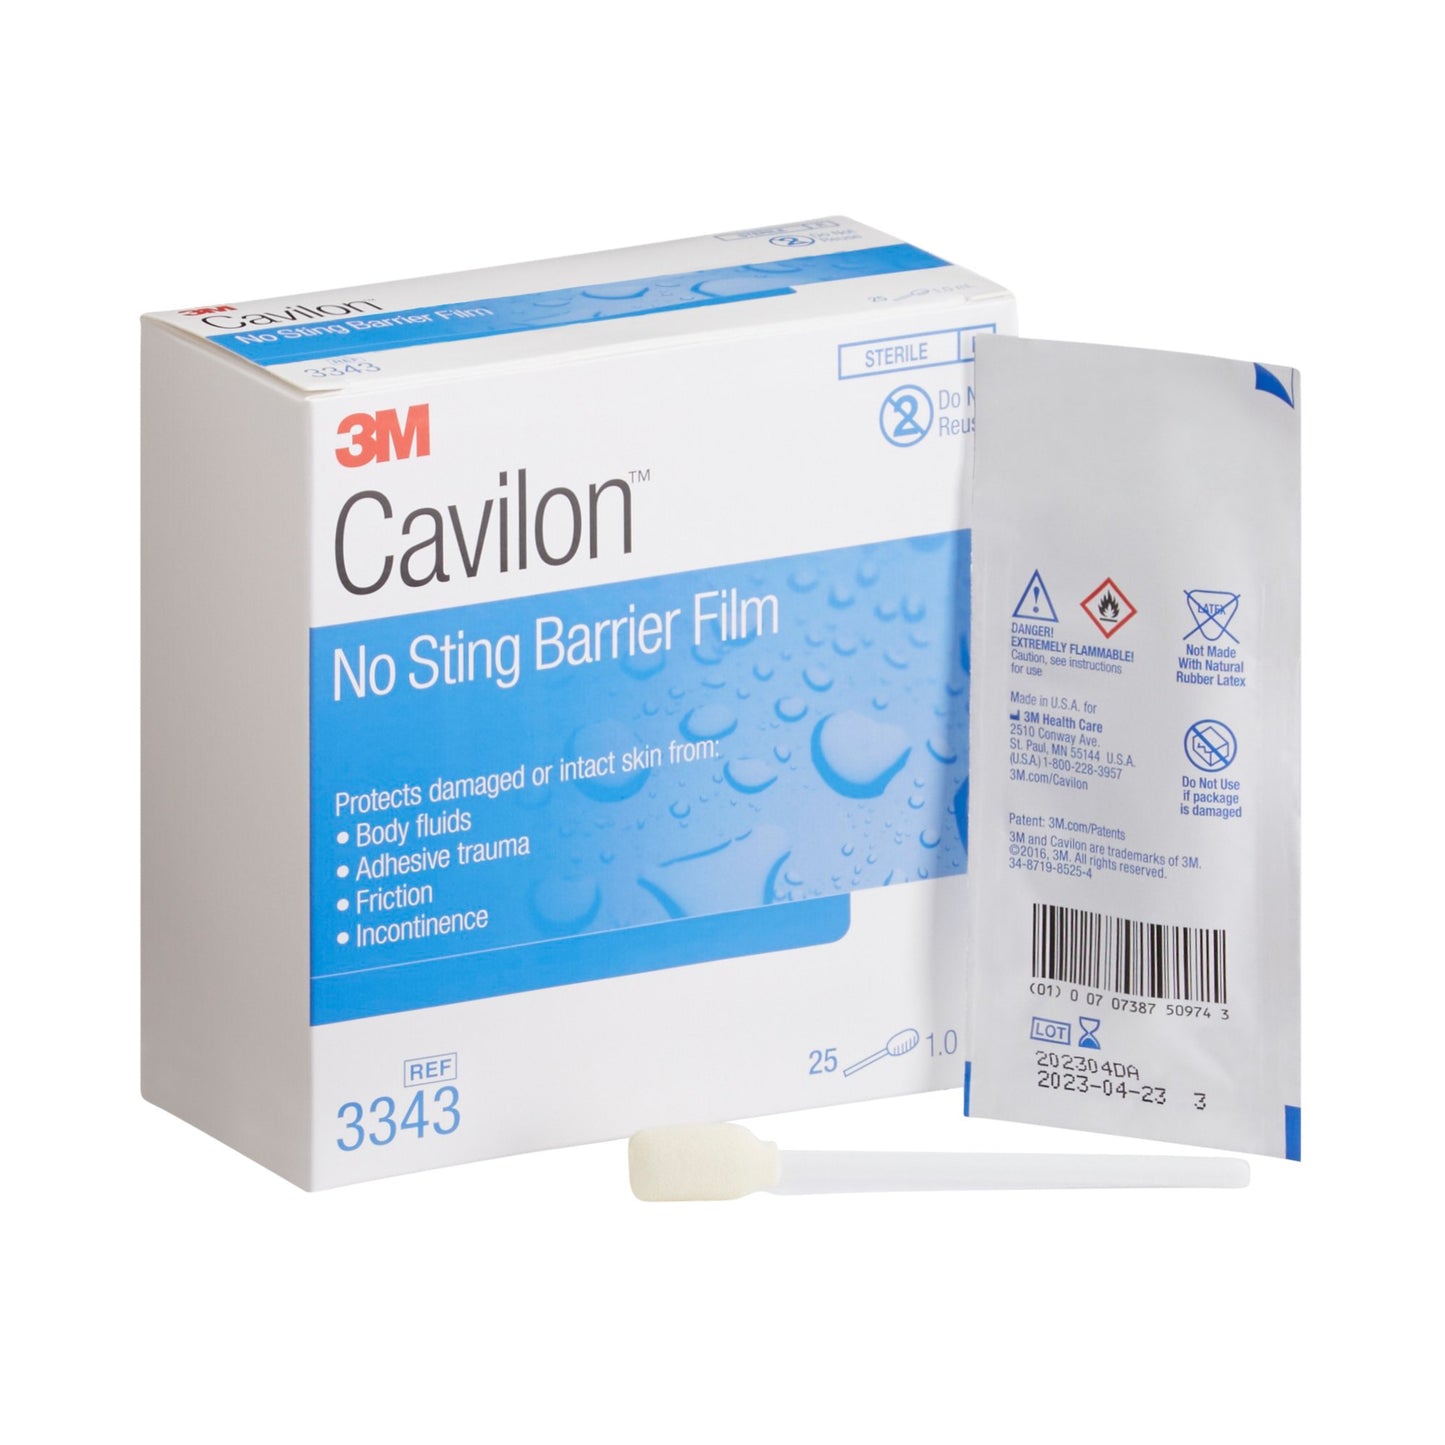 3M Cavilon Barrier Film, No Sting, Alcohol-Free, Conforming, 1.0 Ml, Sold As 25/Box 3M 3343